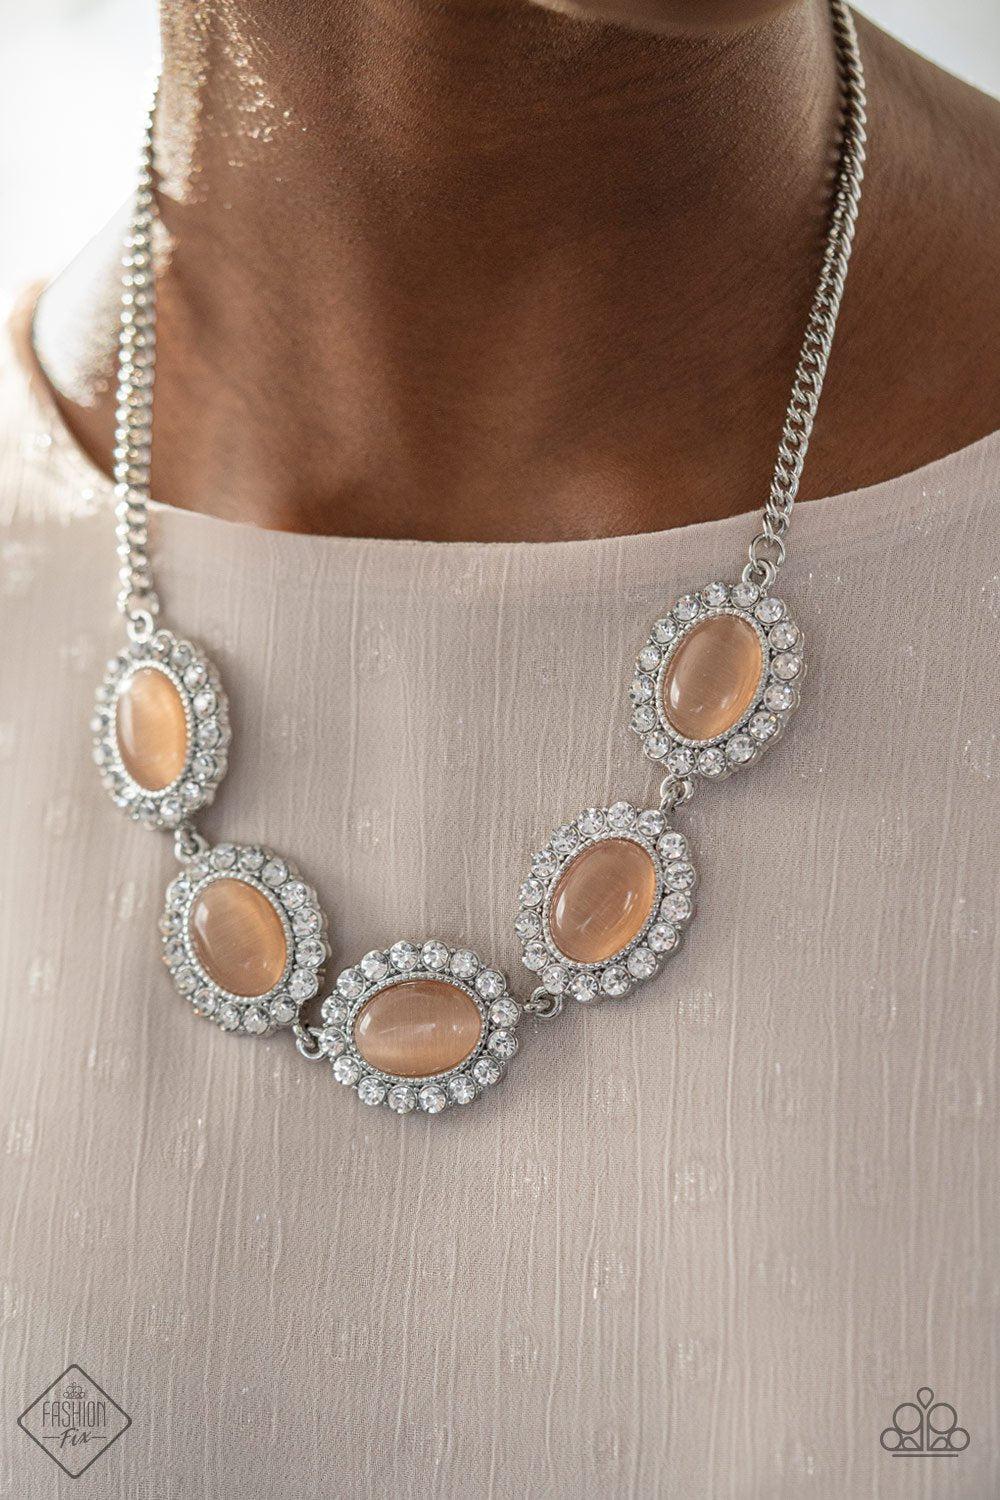 Glimpses of Malibu Complete Trend Blend (4 pc set) February 2021 - Paparazzi Accessories Fashion Fix - Necklace -CarasShop.com - $5 Jewelry by Cara Jewels